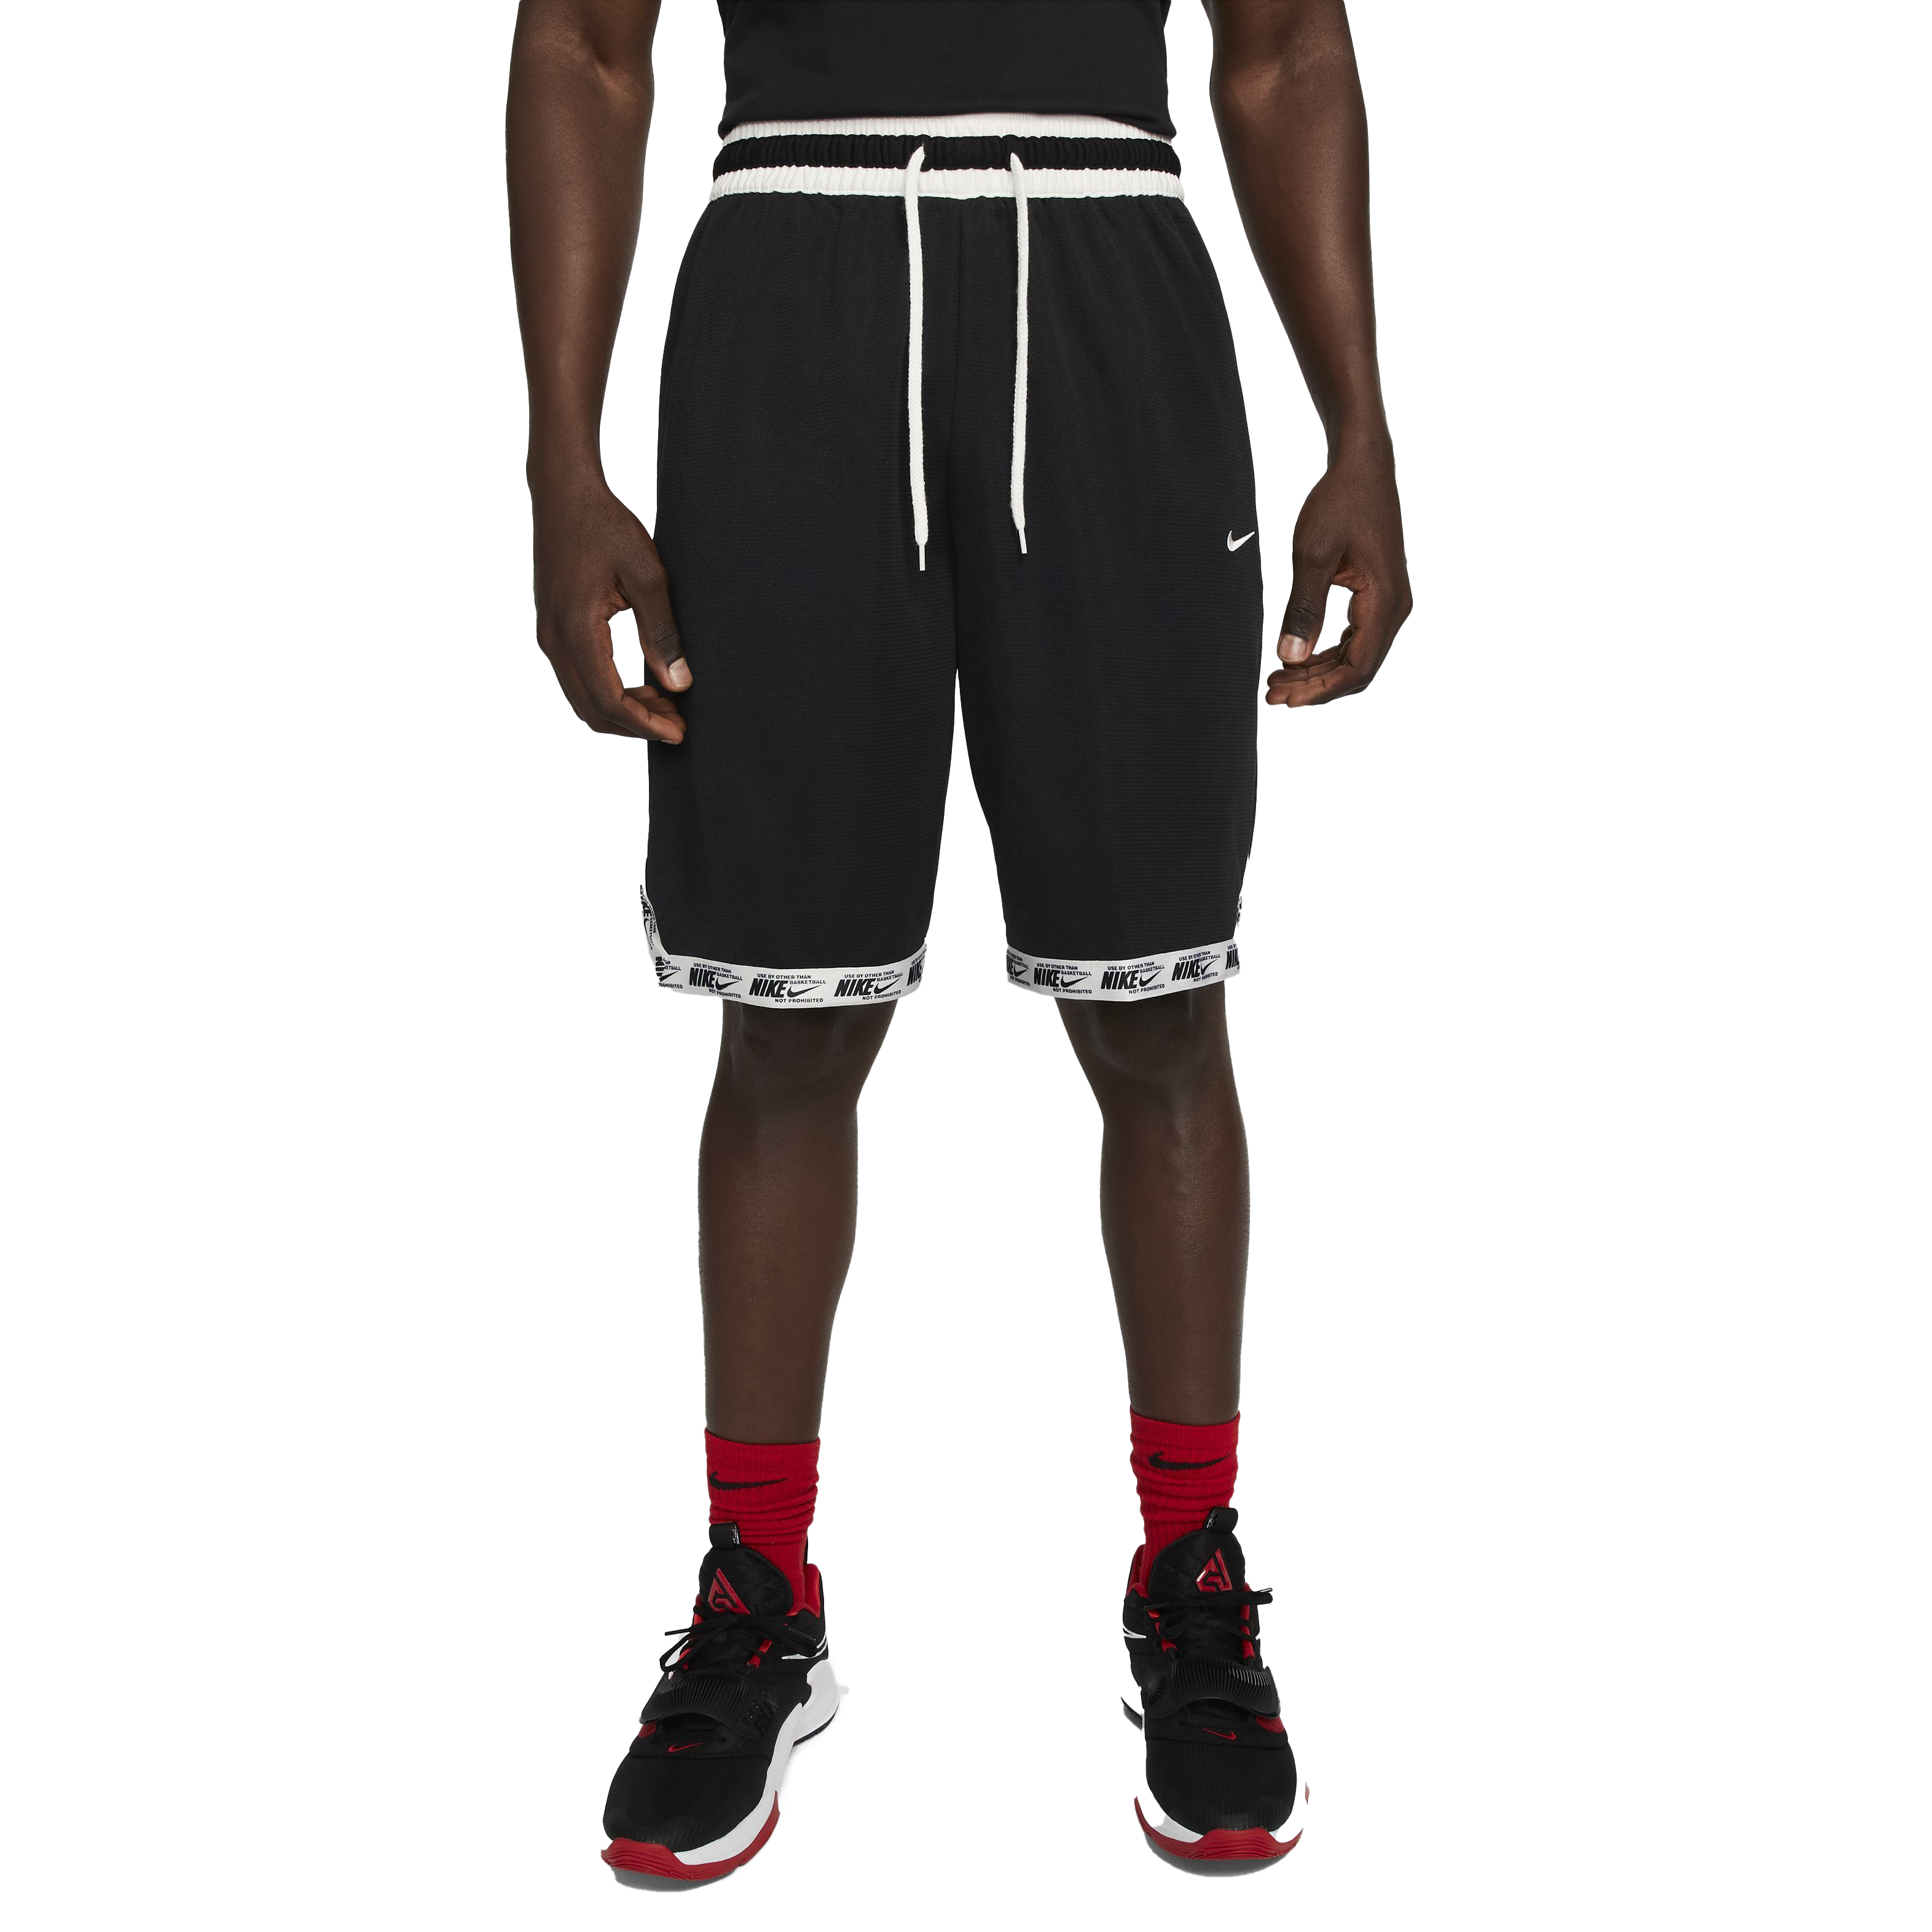 Nike Basketball Dri-Fit DNA 10-Inch Shorts in Gray